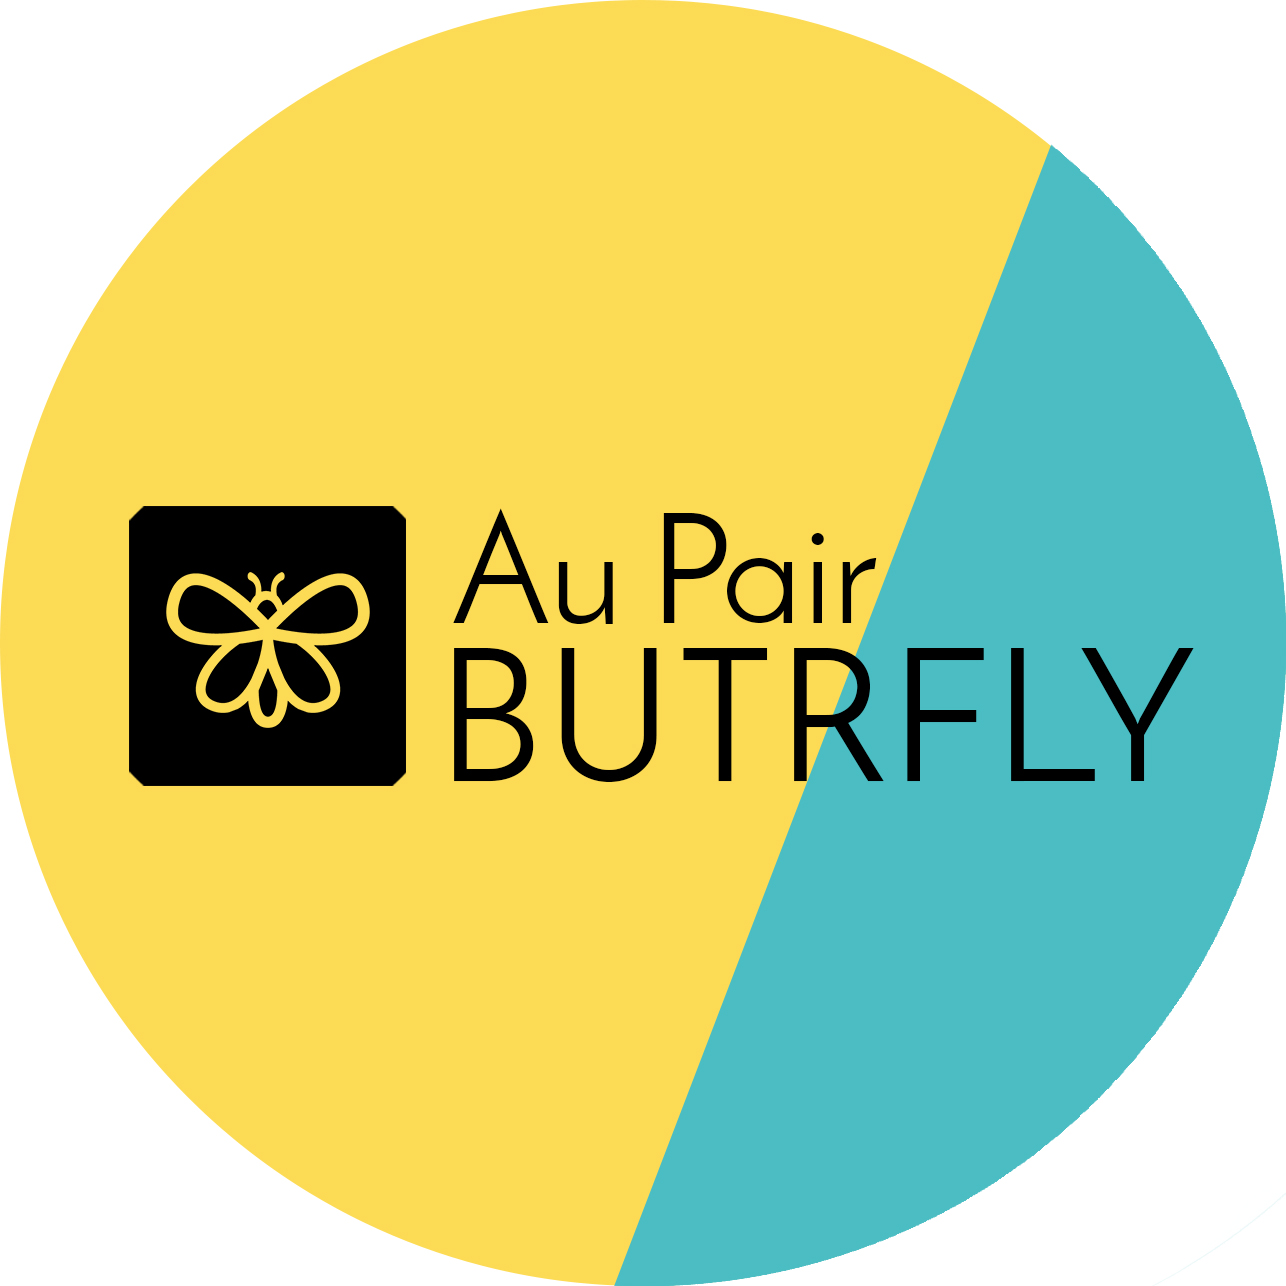 Au pair butterfly